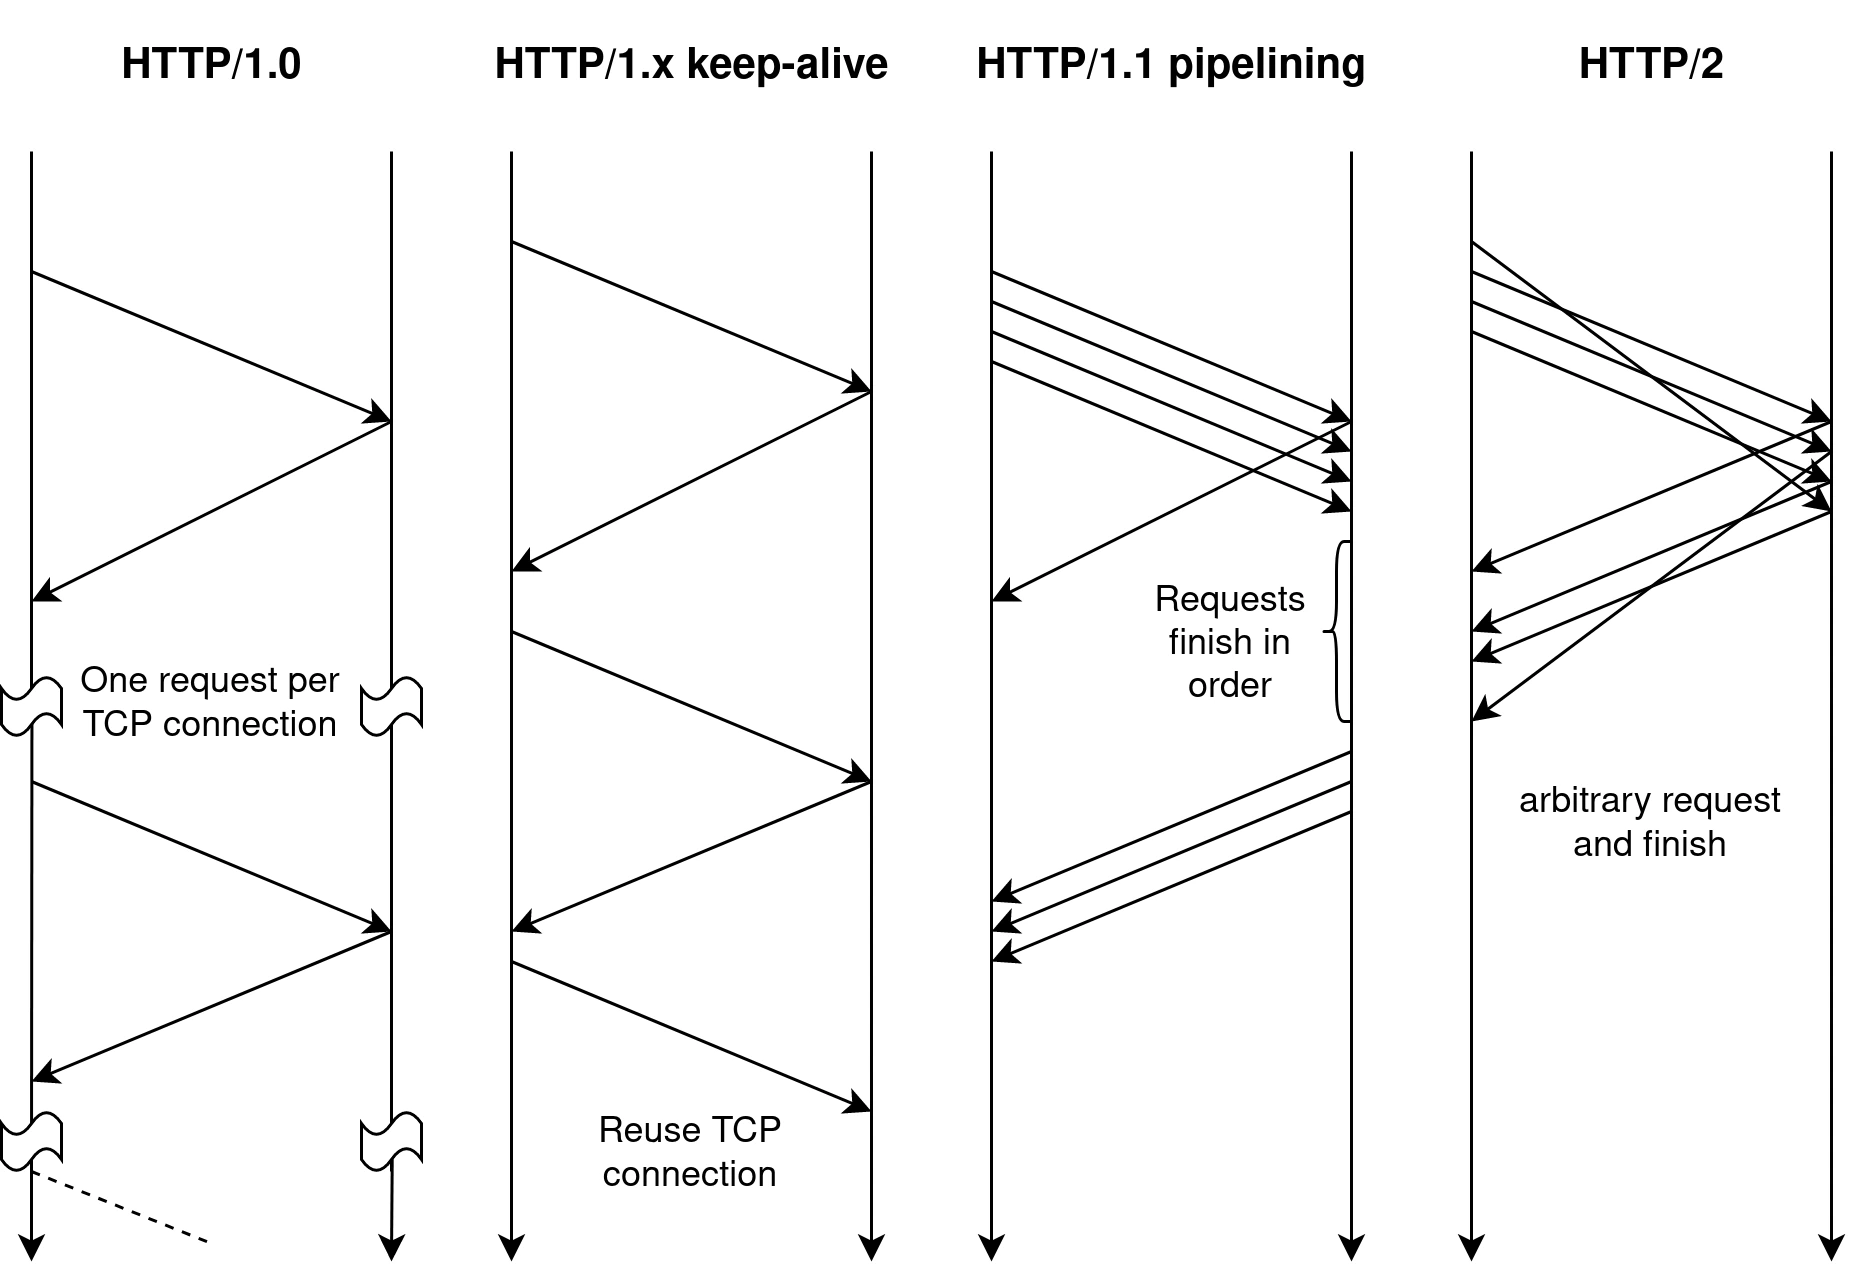 The evolution of how HTTP handles request and responses. From HTTP/1.0 to HTTP/2